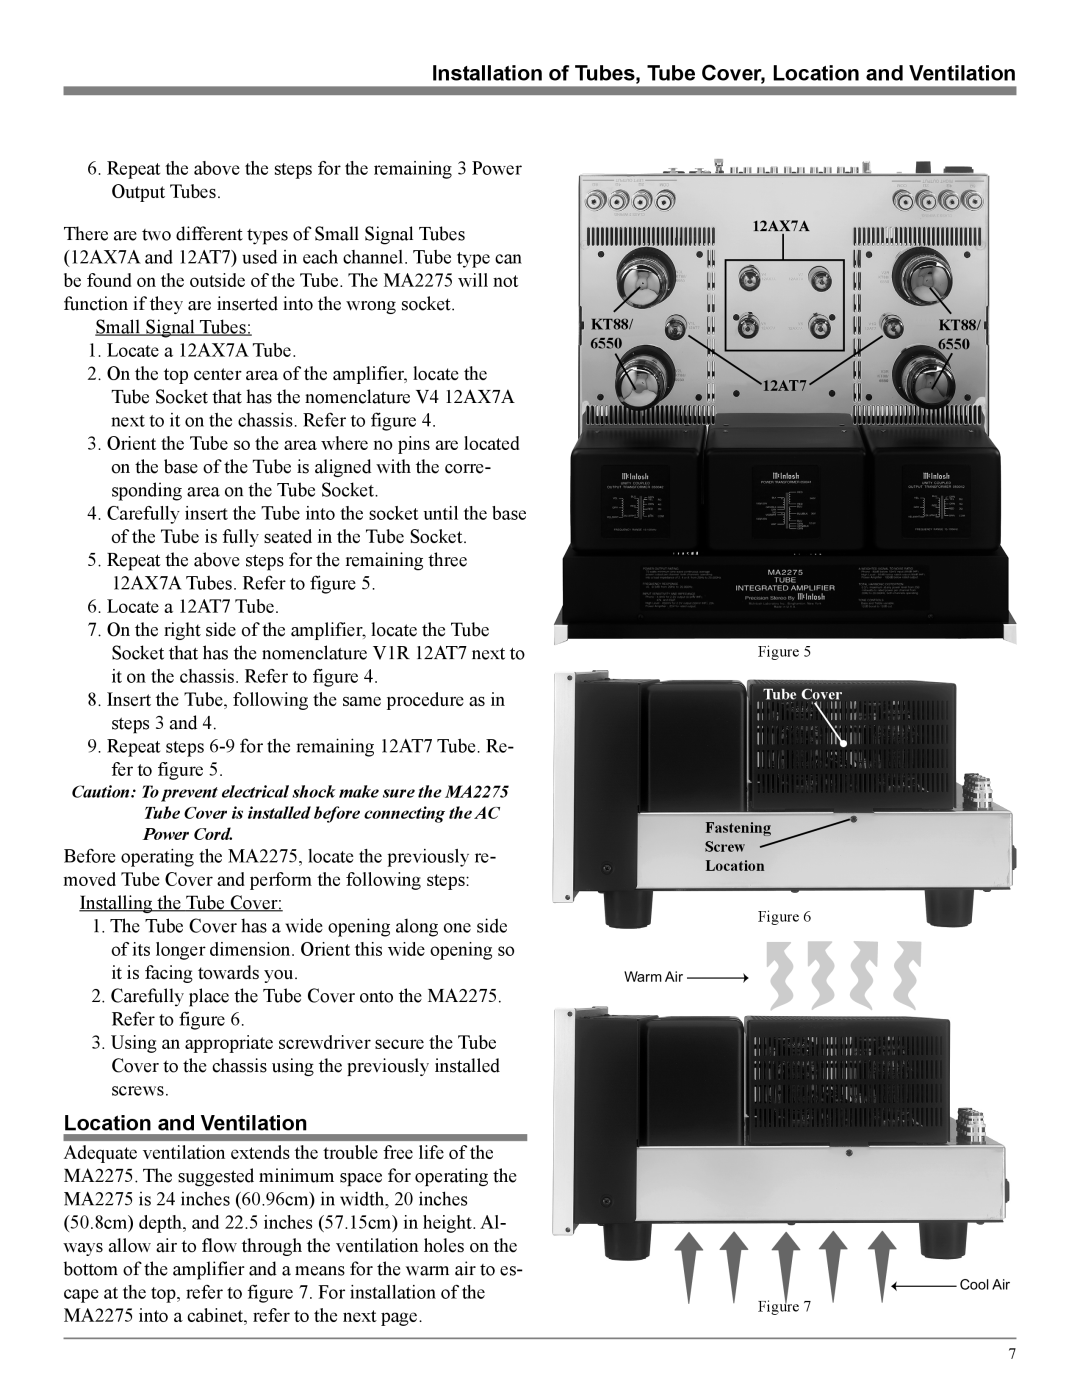 McIntosh MA2275 owner manual Location and Ventilation 